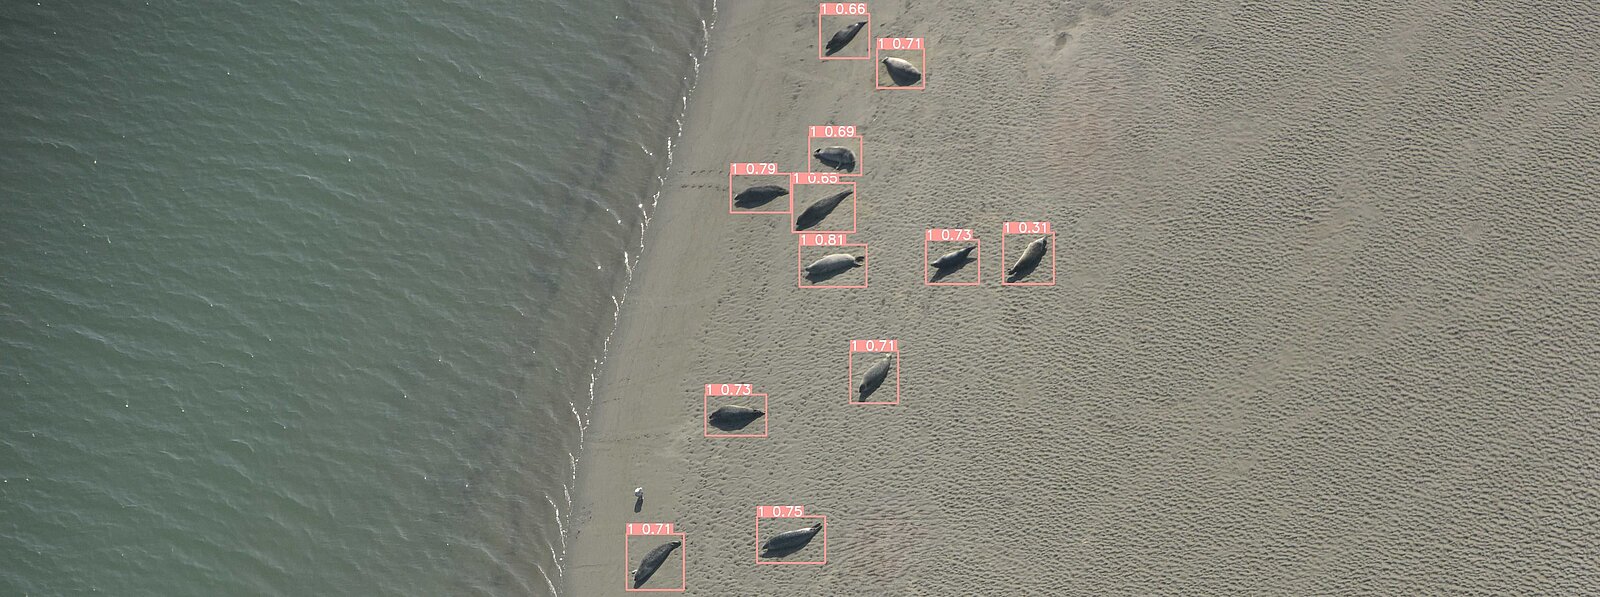 grey seals at the beach, photo taken by plane, Image analysis by artificial intelligence  